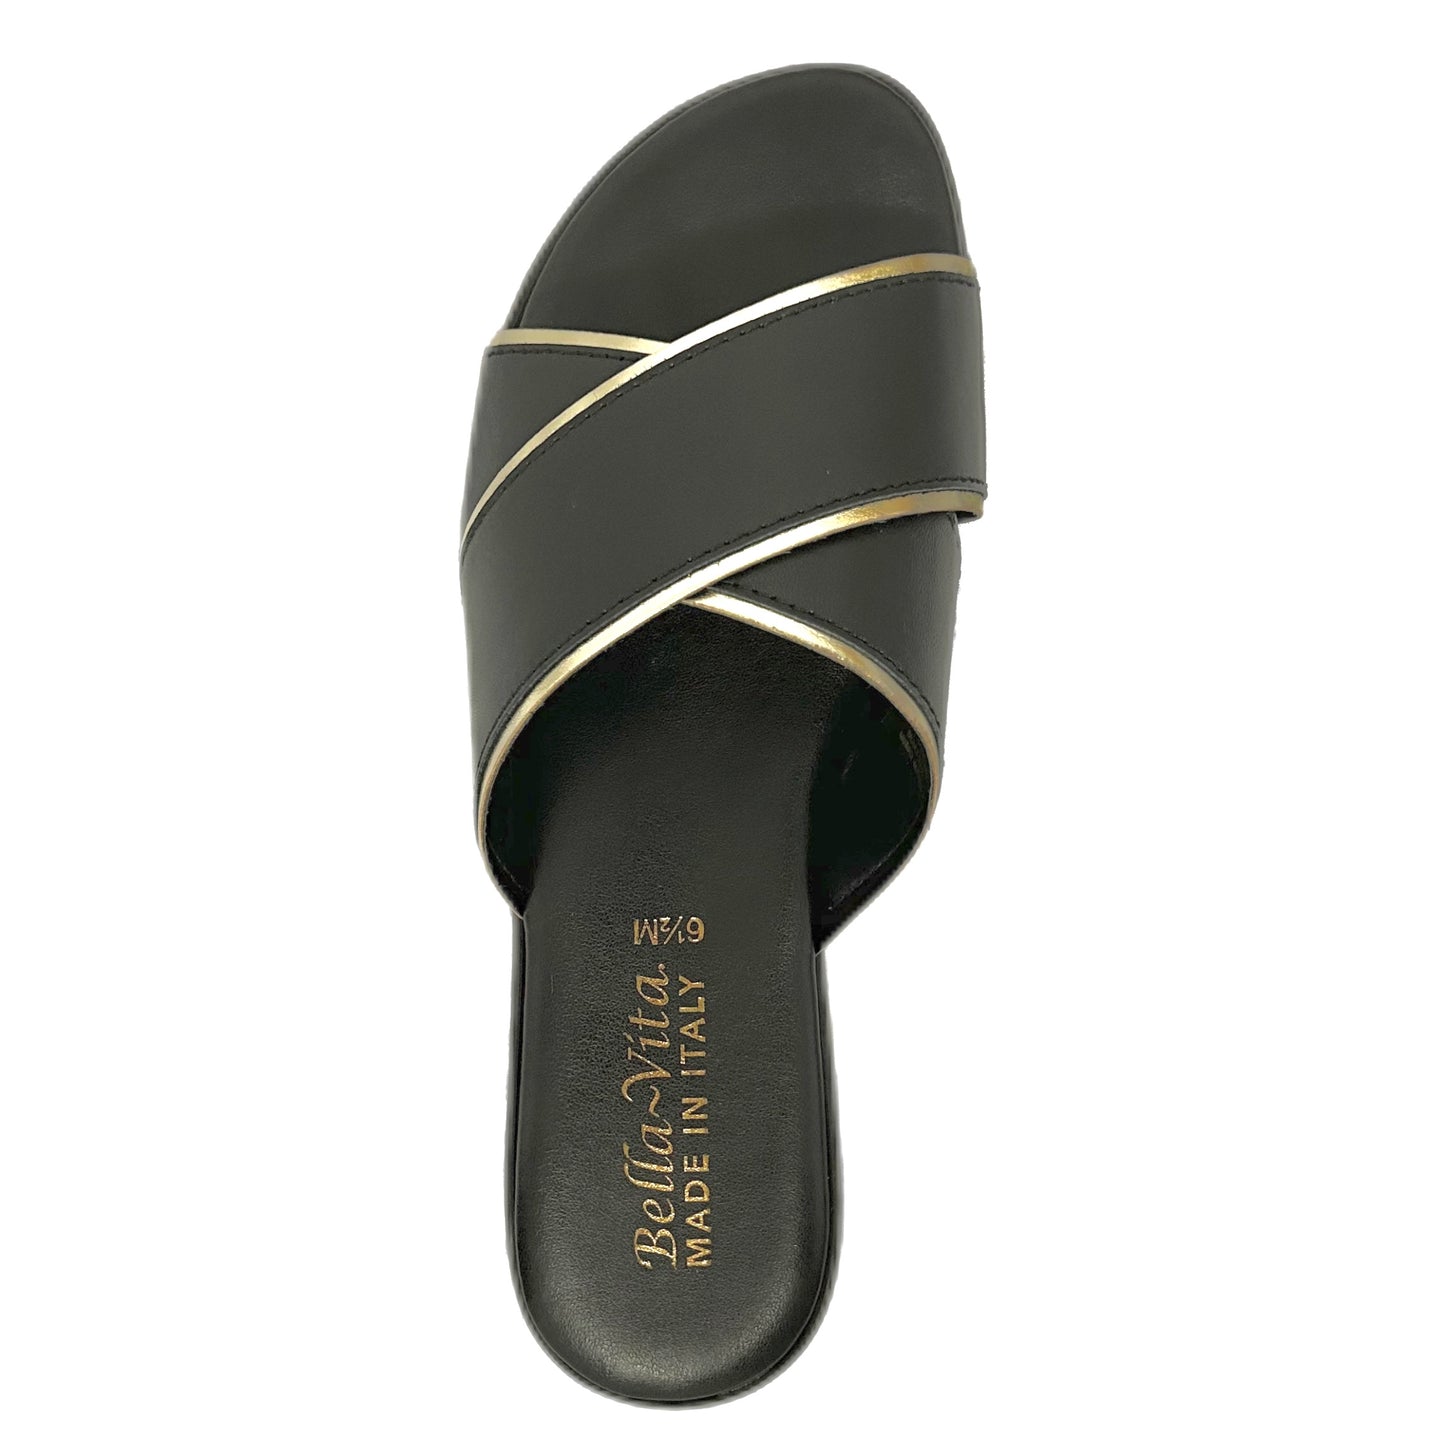 TAB-ITALY Slide Sandals Flats Women's Shoes